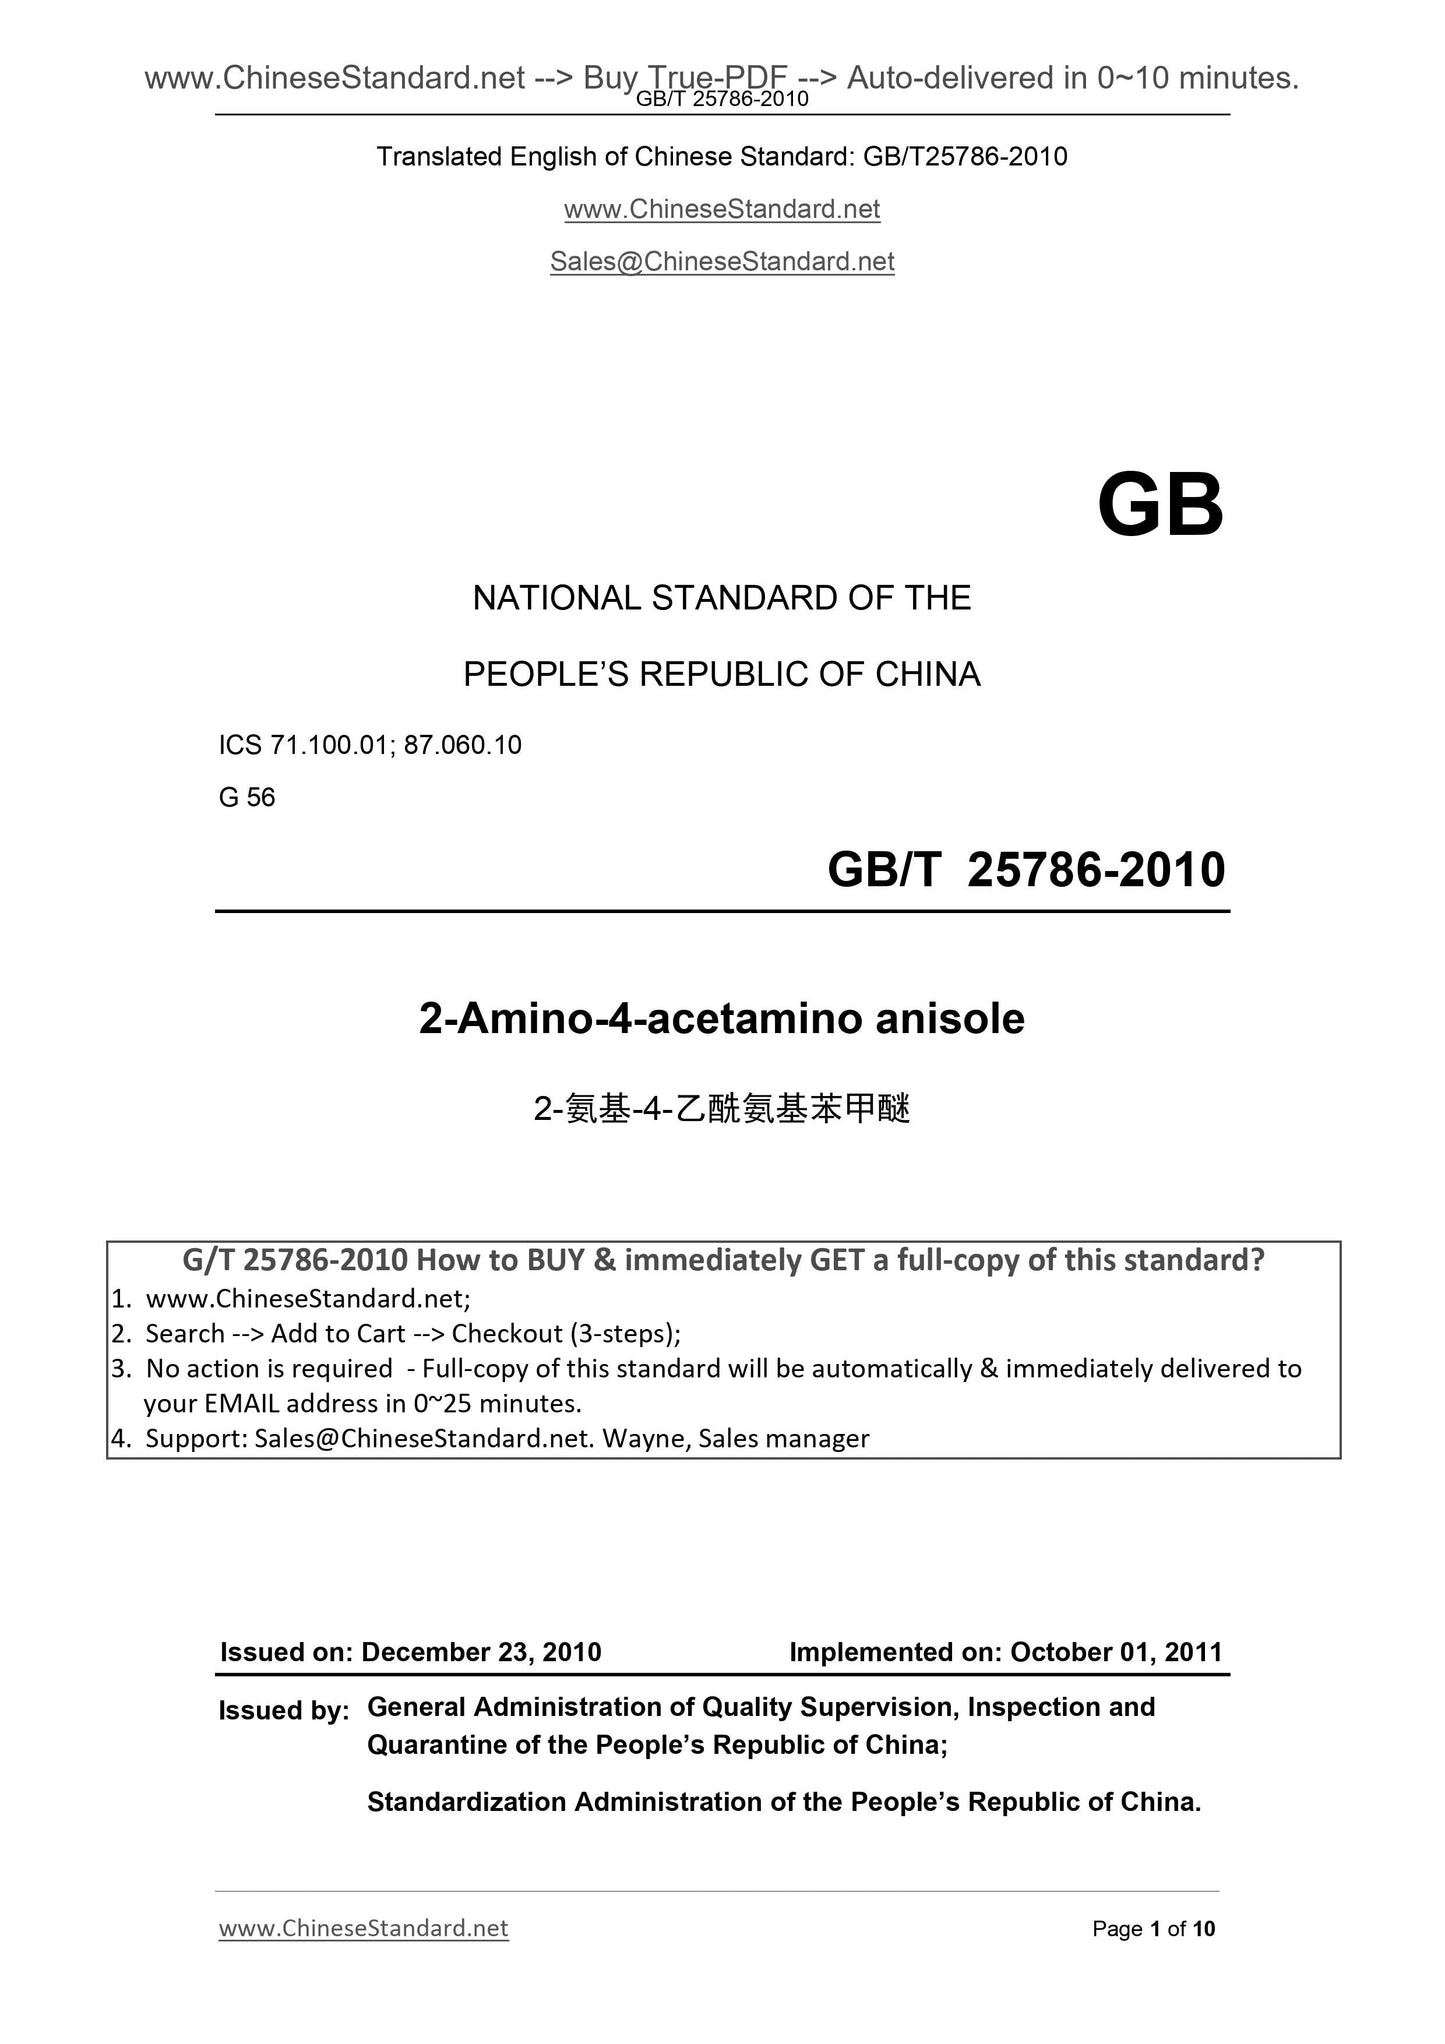 GB/T 25786-2010 Page 1